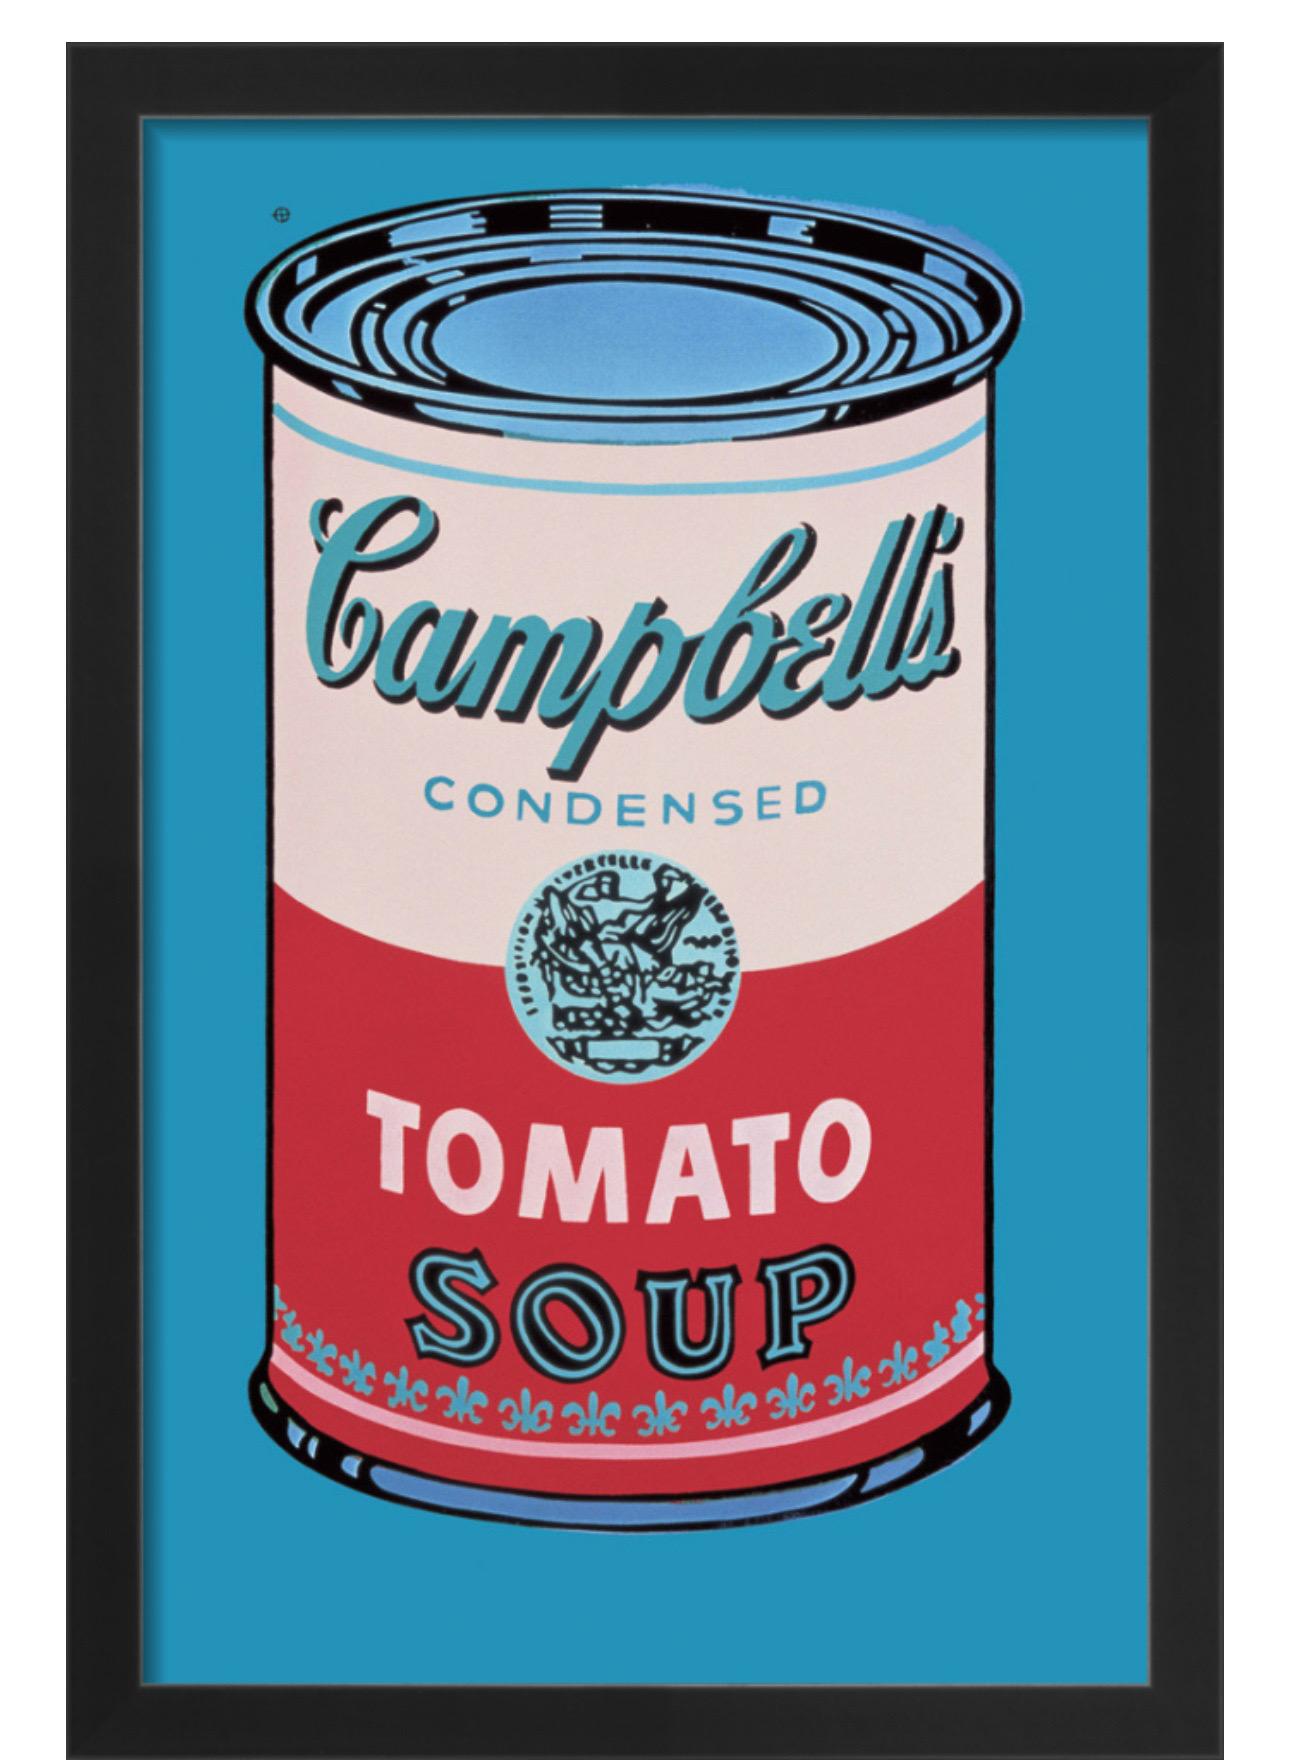 Andy Warhol, Campbell's Soup Can, 1965 (pink & red) (Framed) 

250gsm coated graphic paper

Paper size: 33 x 48 cm 
Framed size: 36 x 51 cm

In a sustainably sourced matt black frame 

Andy Warhol’s Campbell’s Soup Cans are among the most